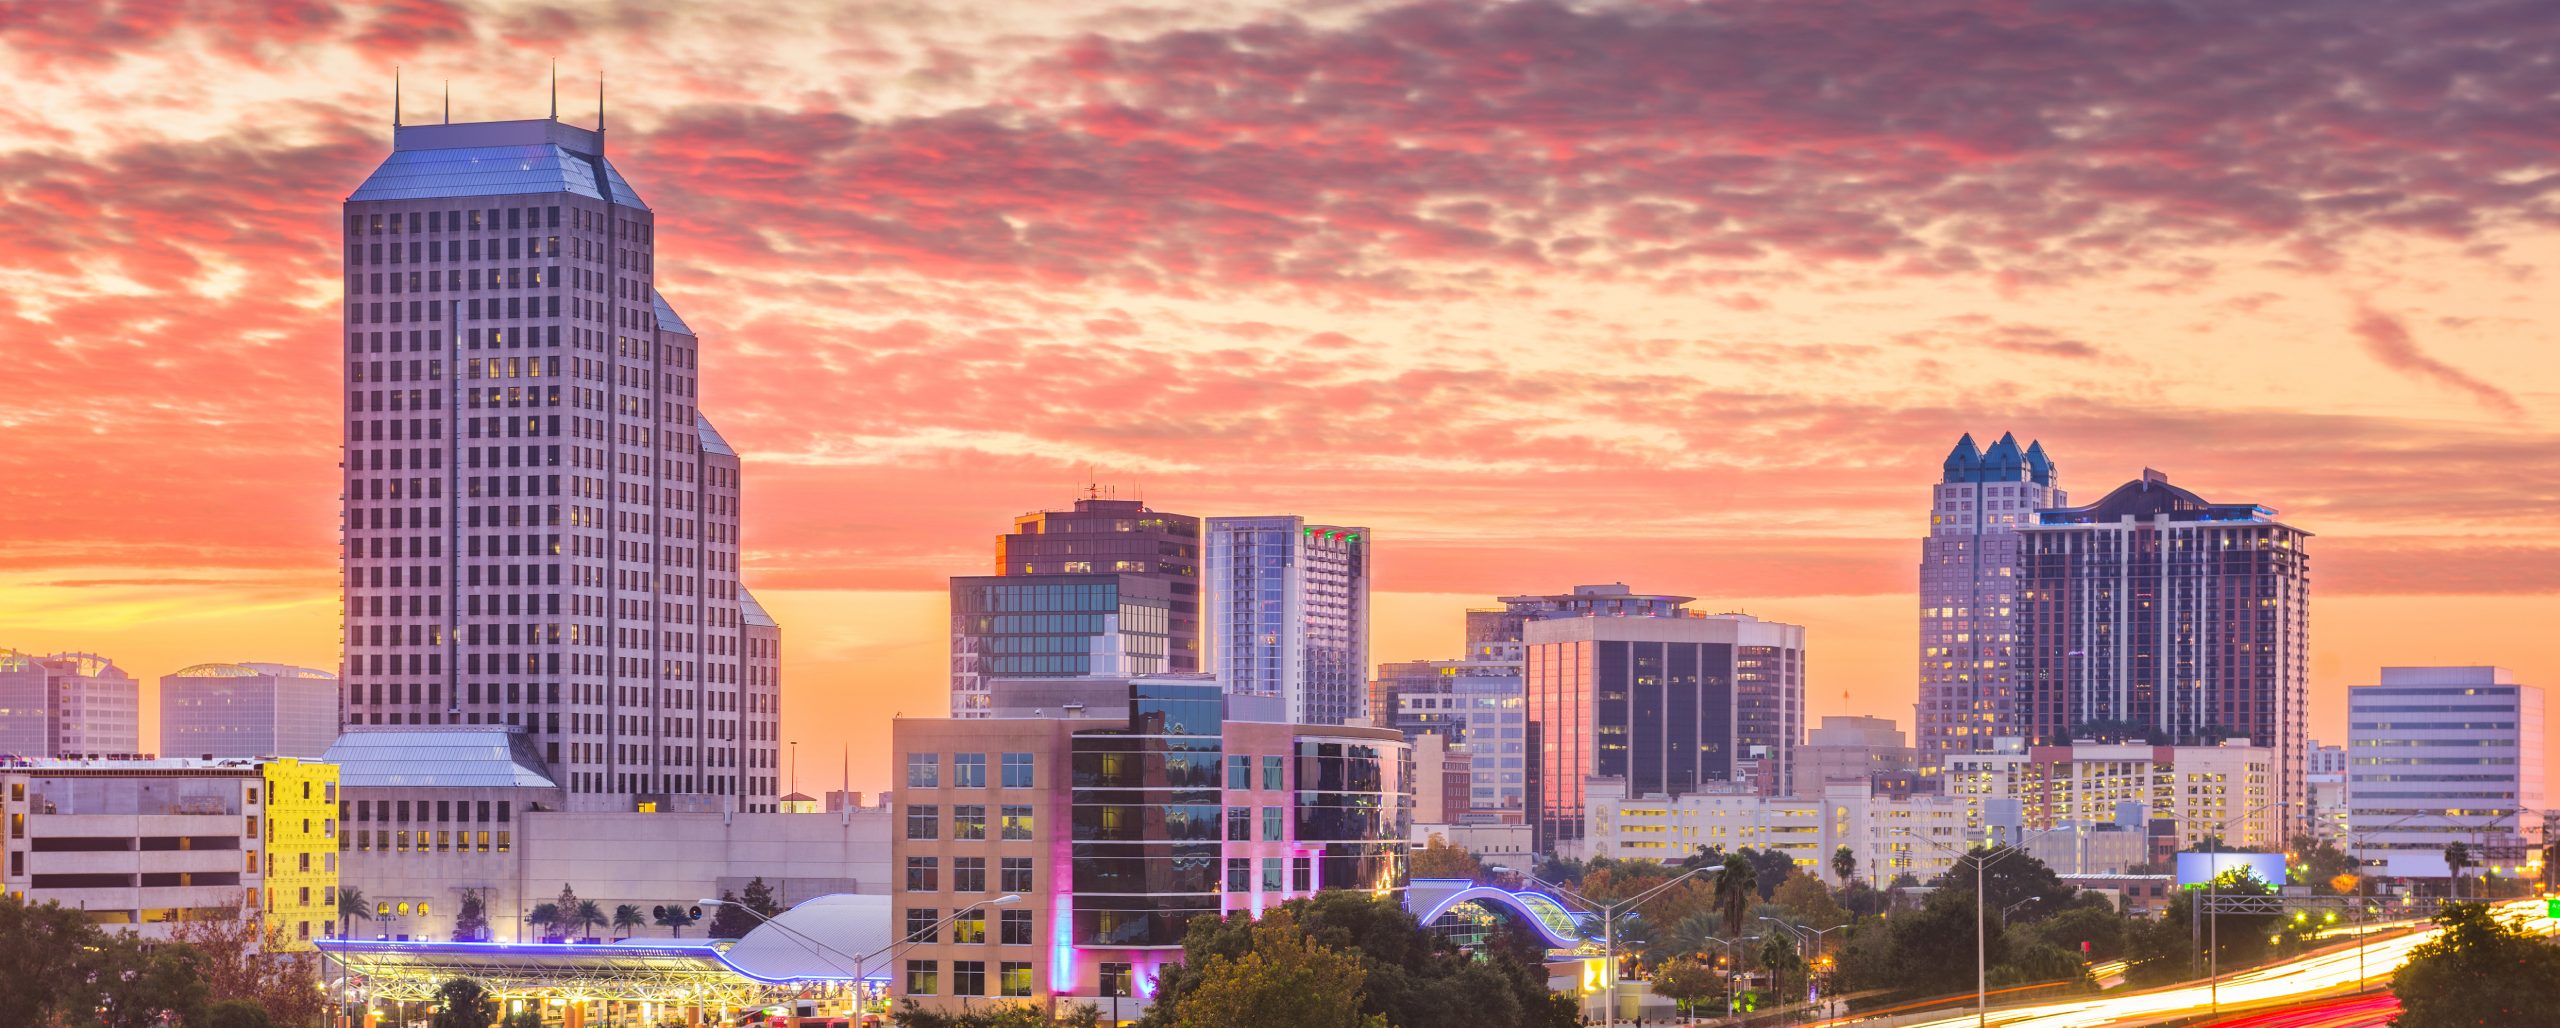 downtown orlando at sunset